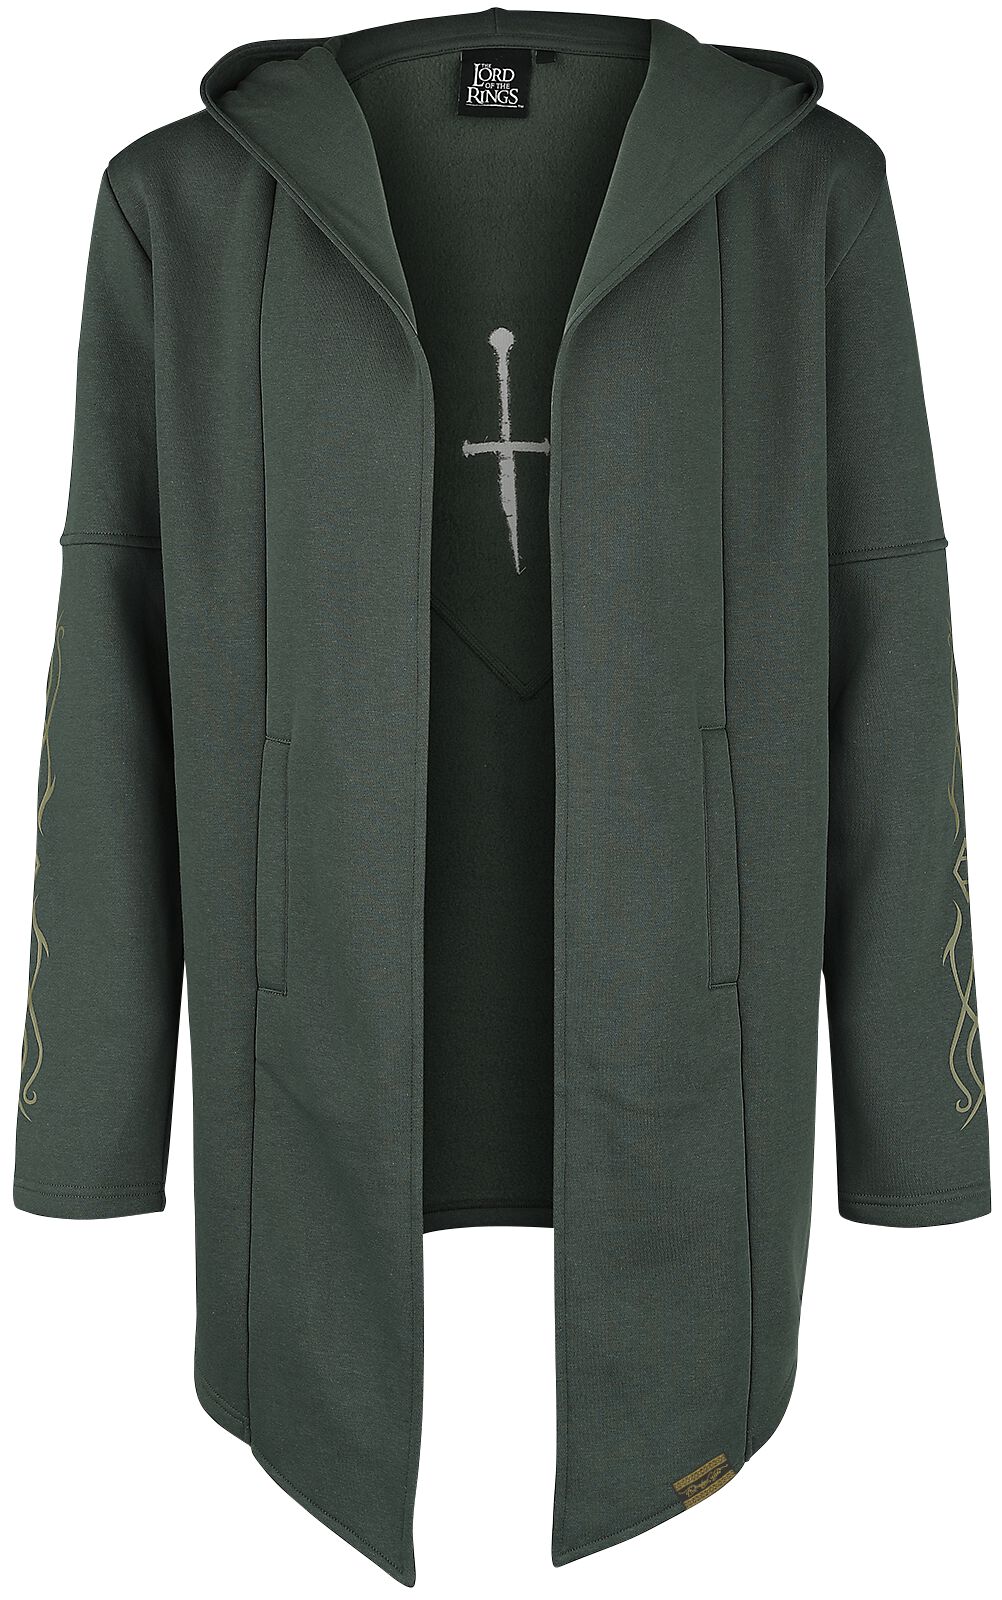 The Lord Of The Rings Dunedain Sweatshirt olive